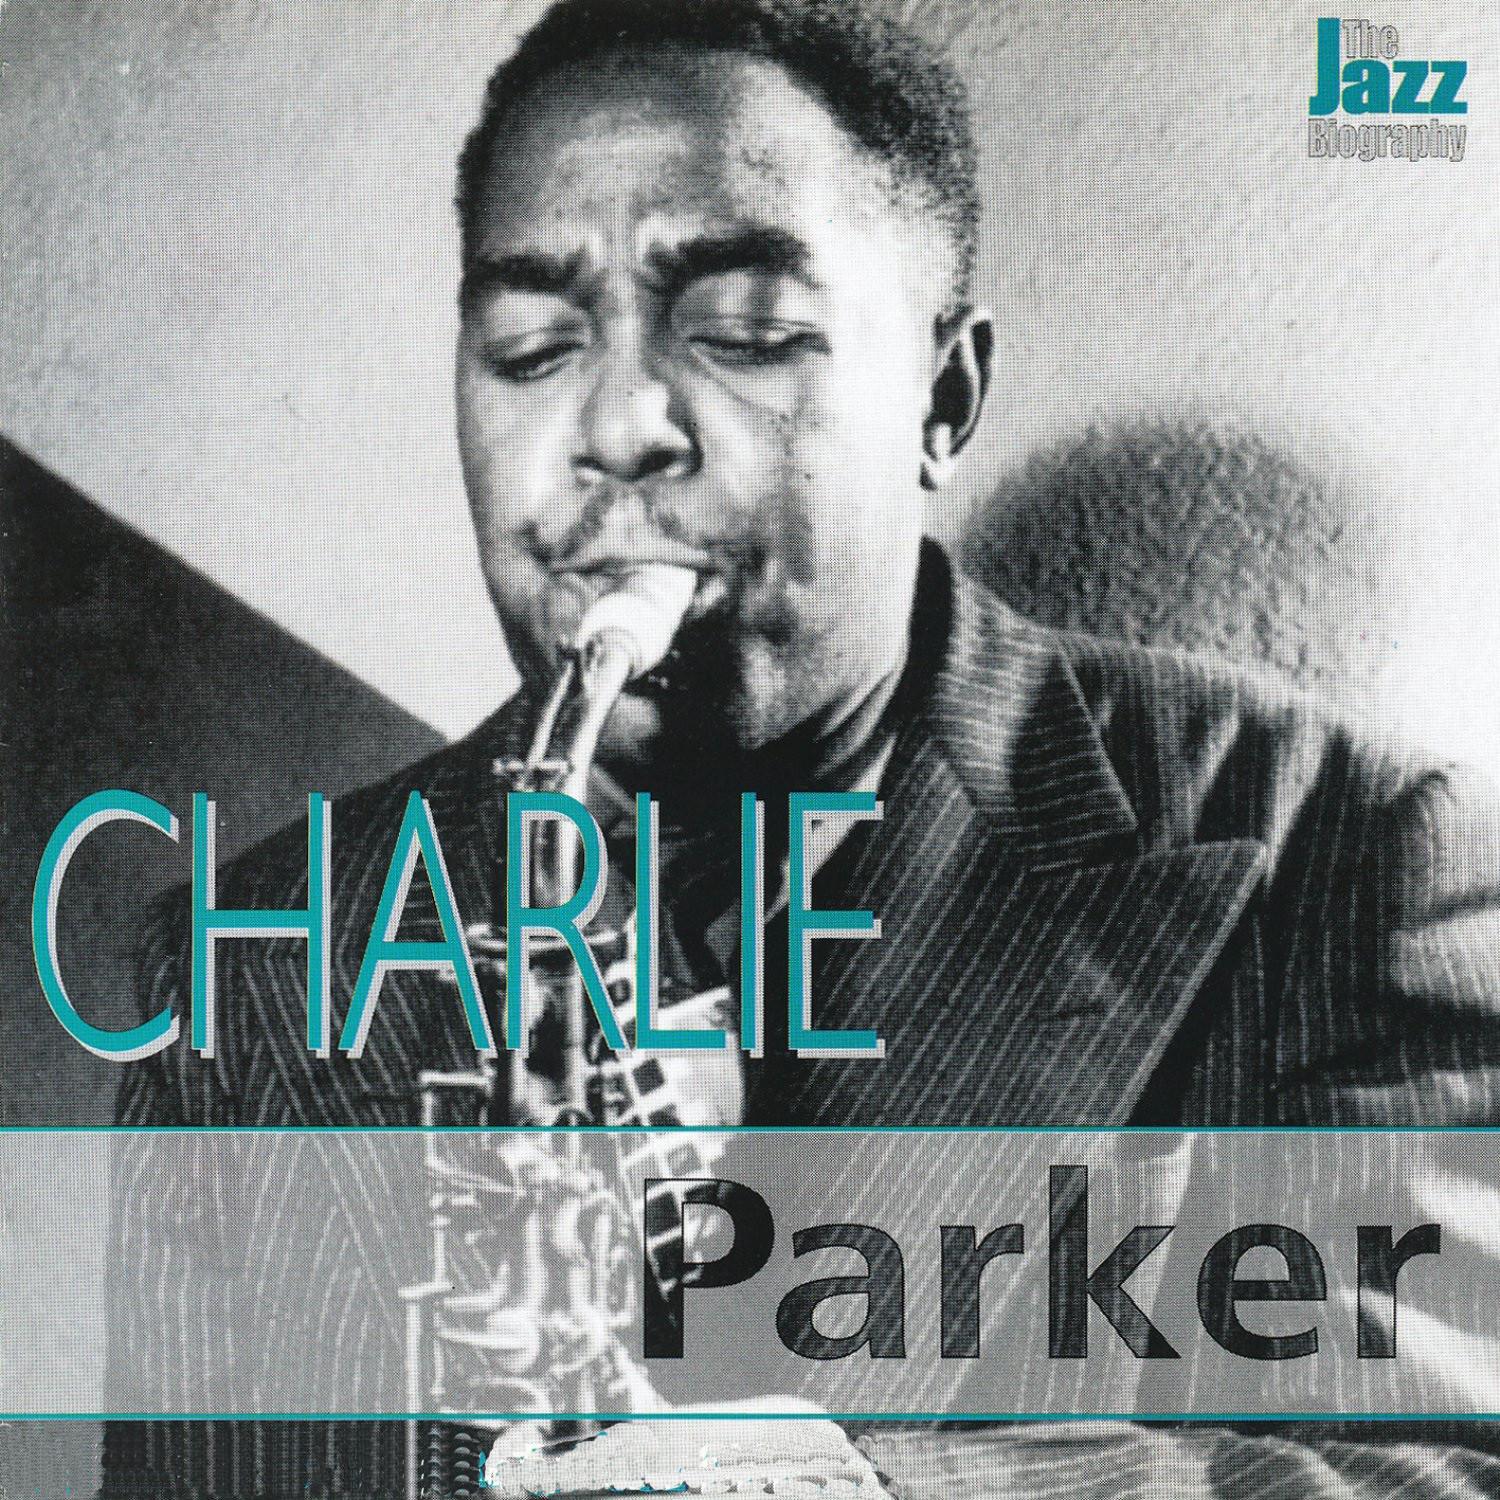 The Jazz Biography: Charlie Parker